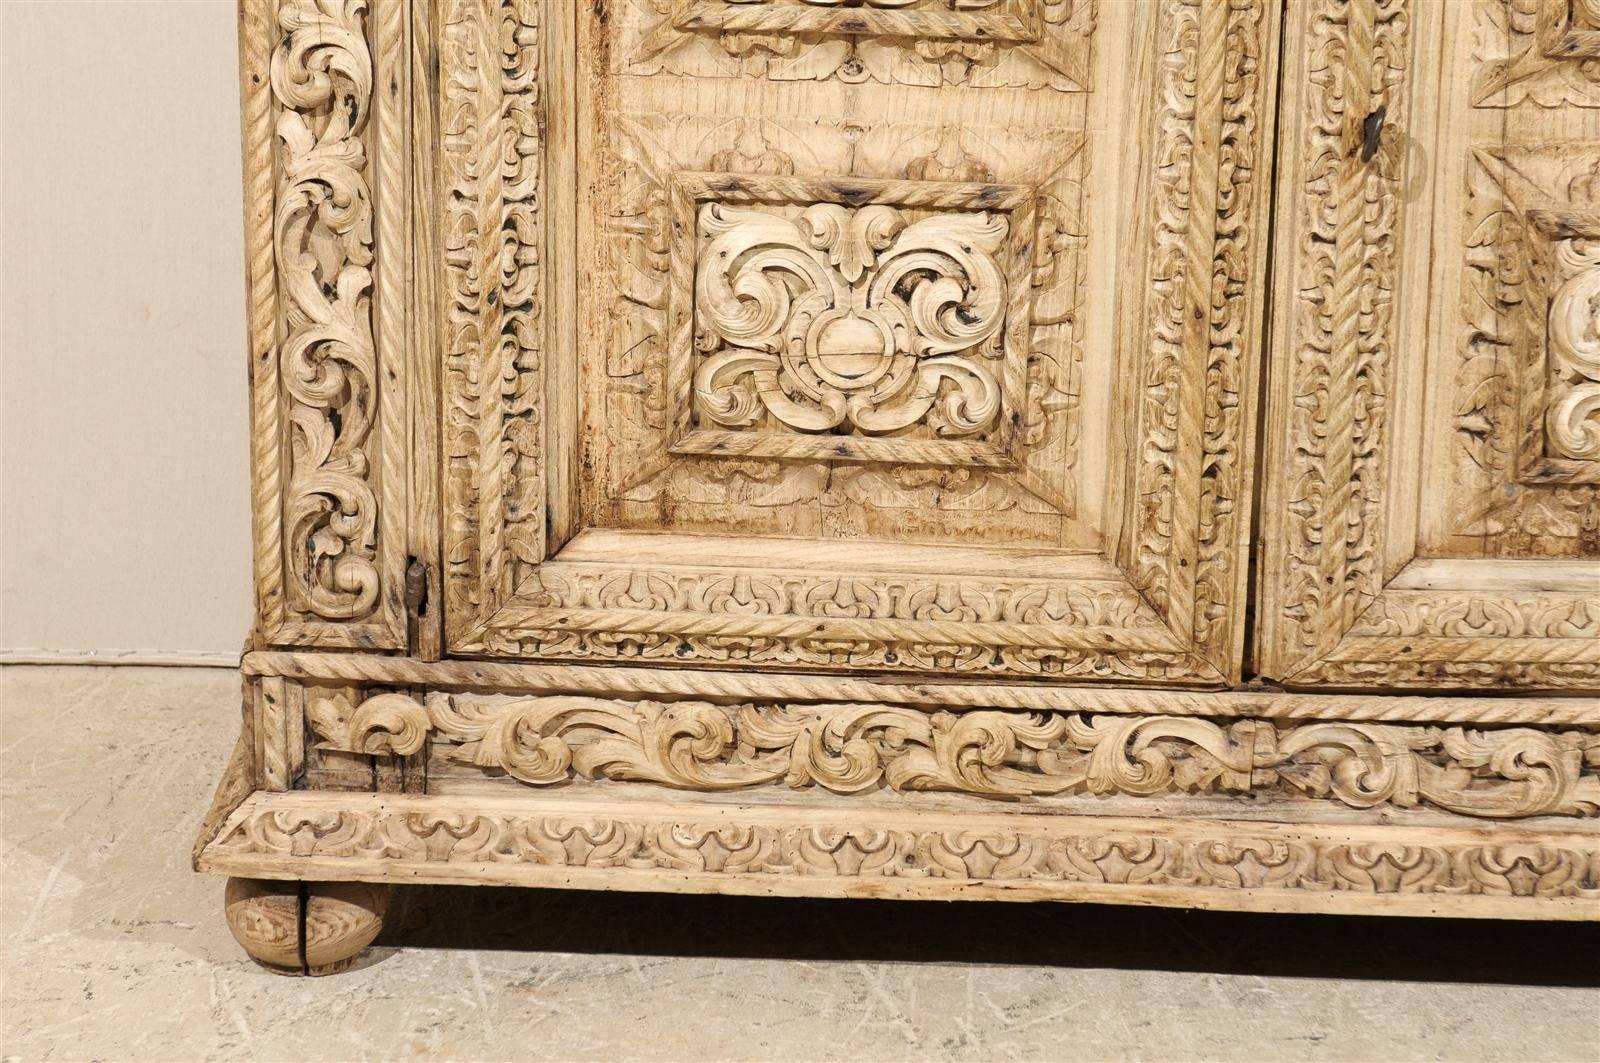 An Italian 18th century two-door credenza with intricate carved details. This bleached Italian buffet is richly carved throughout the front of its body with delicate rinceaux friezes and volute motifs. The doors opens with a key to an inner shelf.